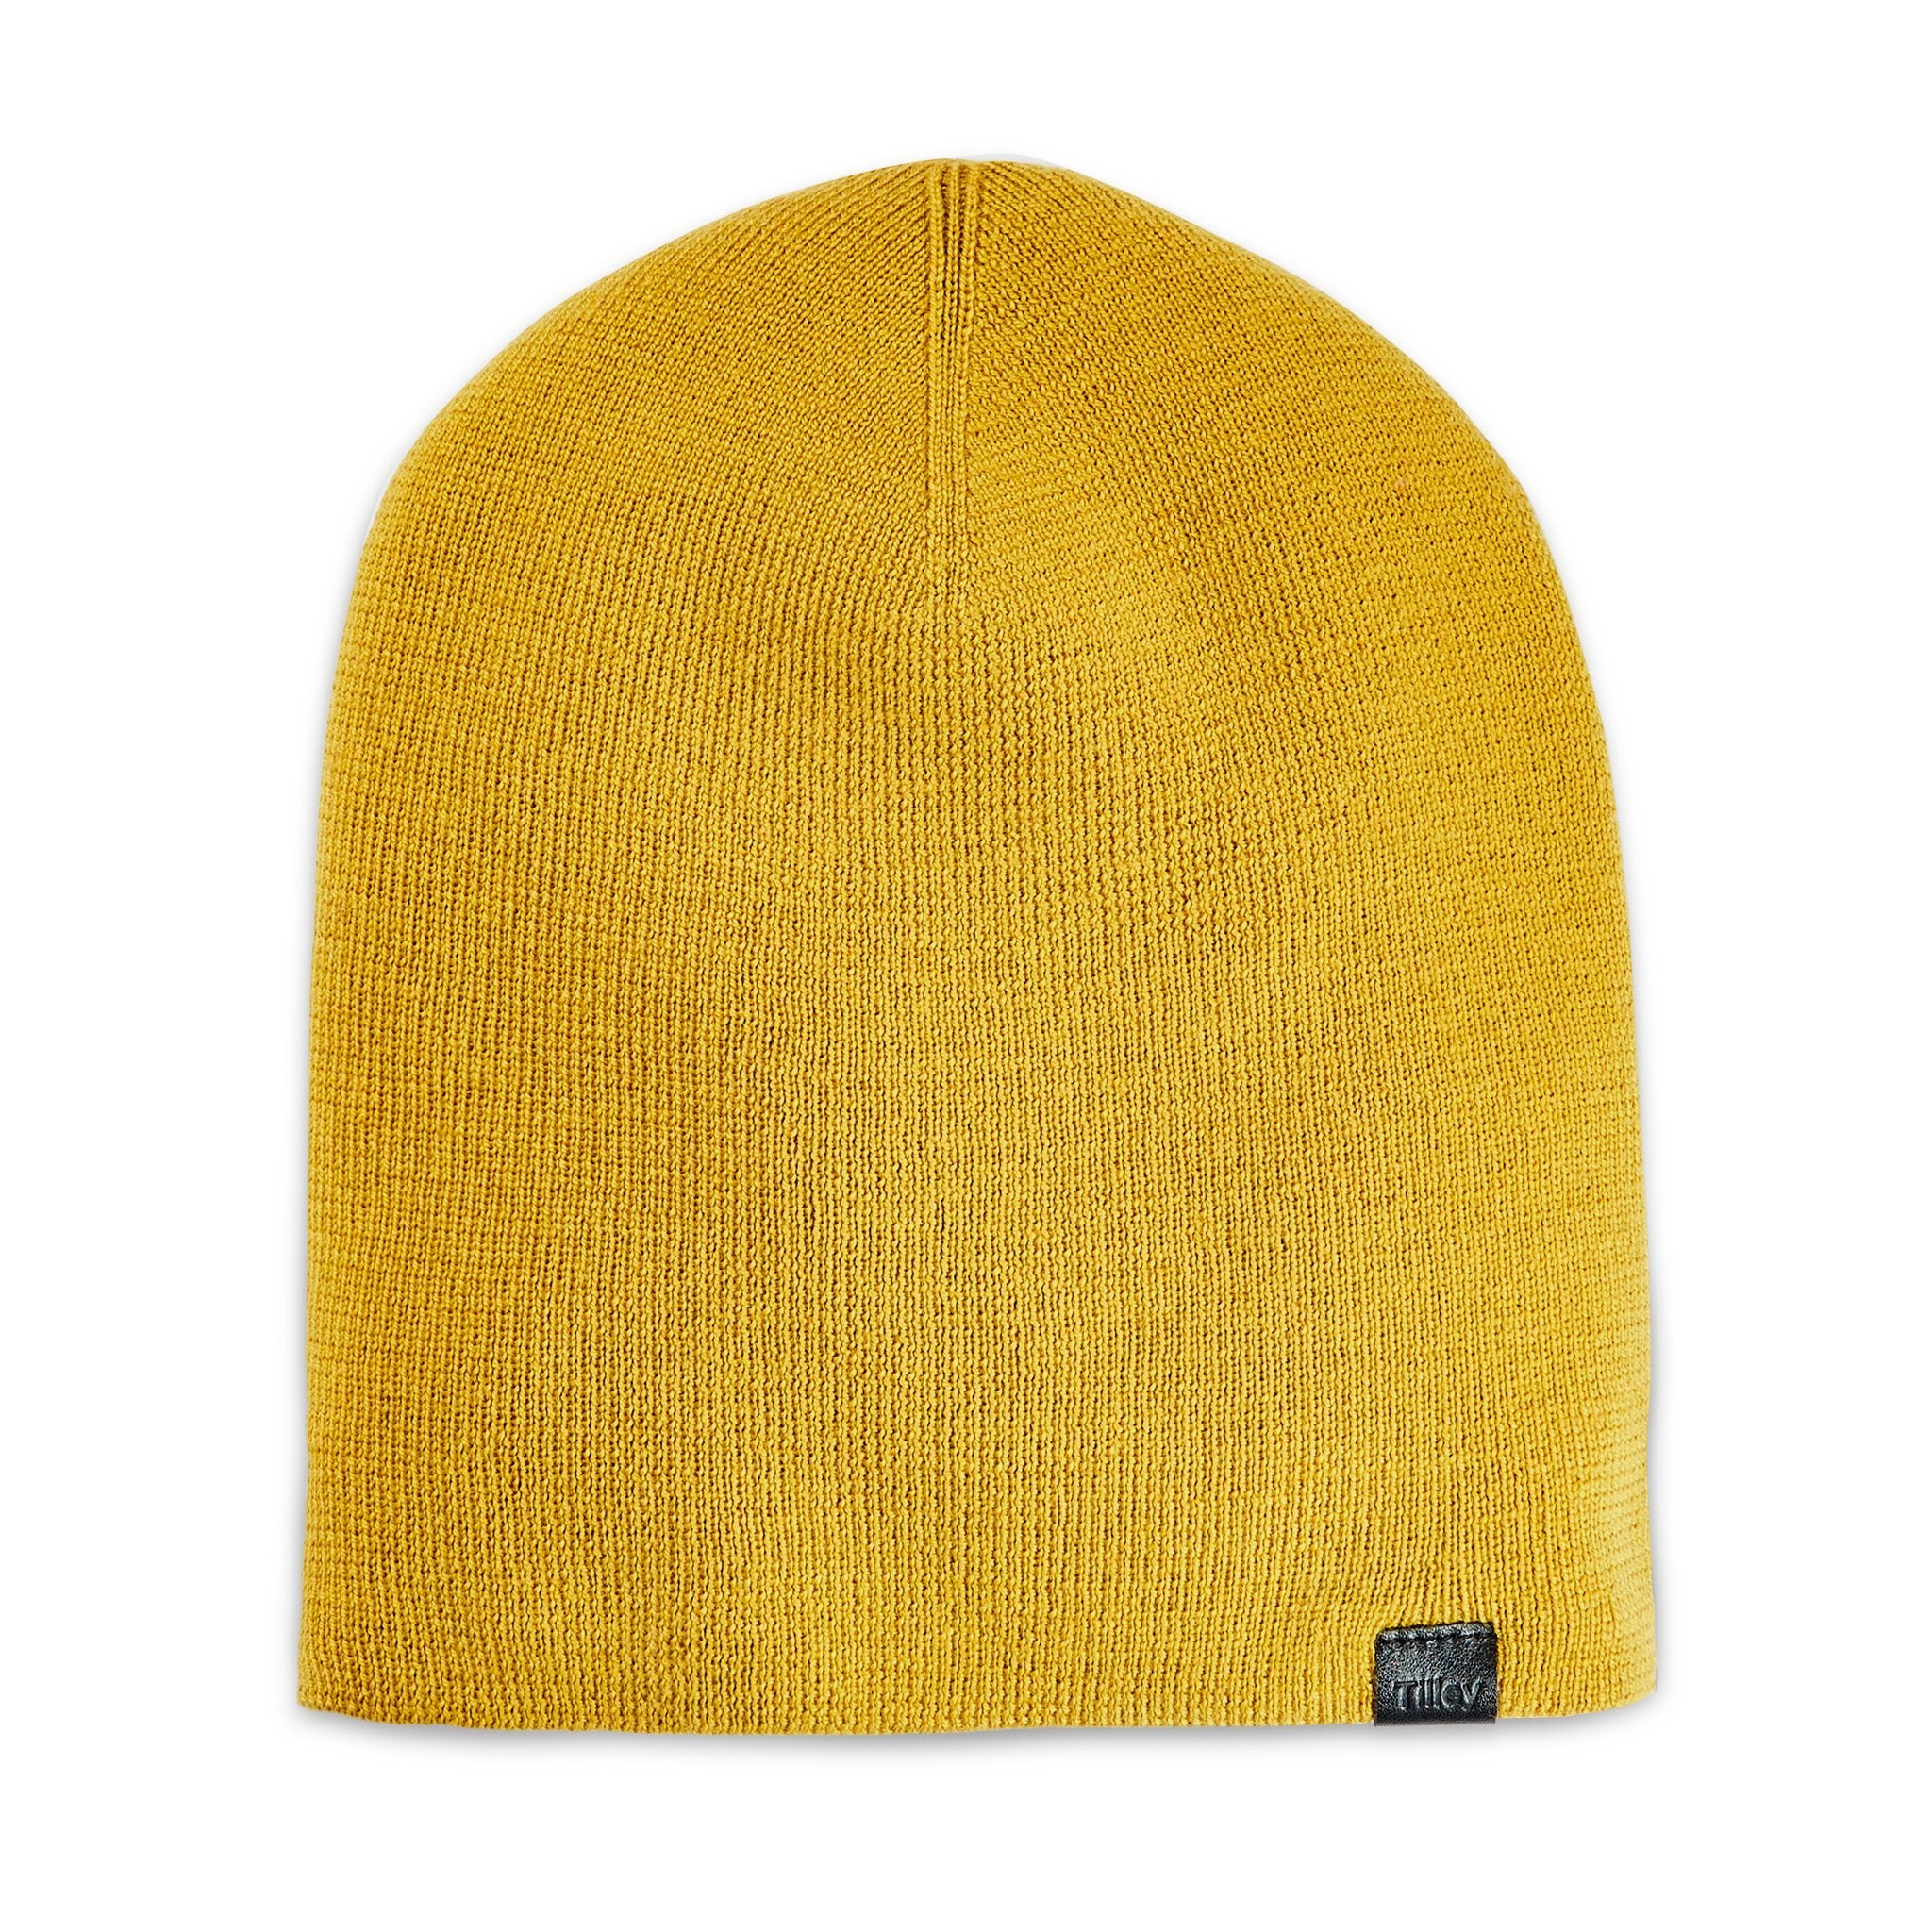 Slouch Reversible Toque in Mustard/Black